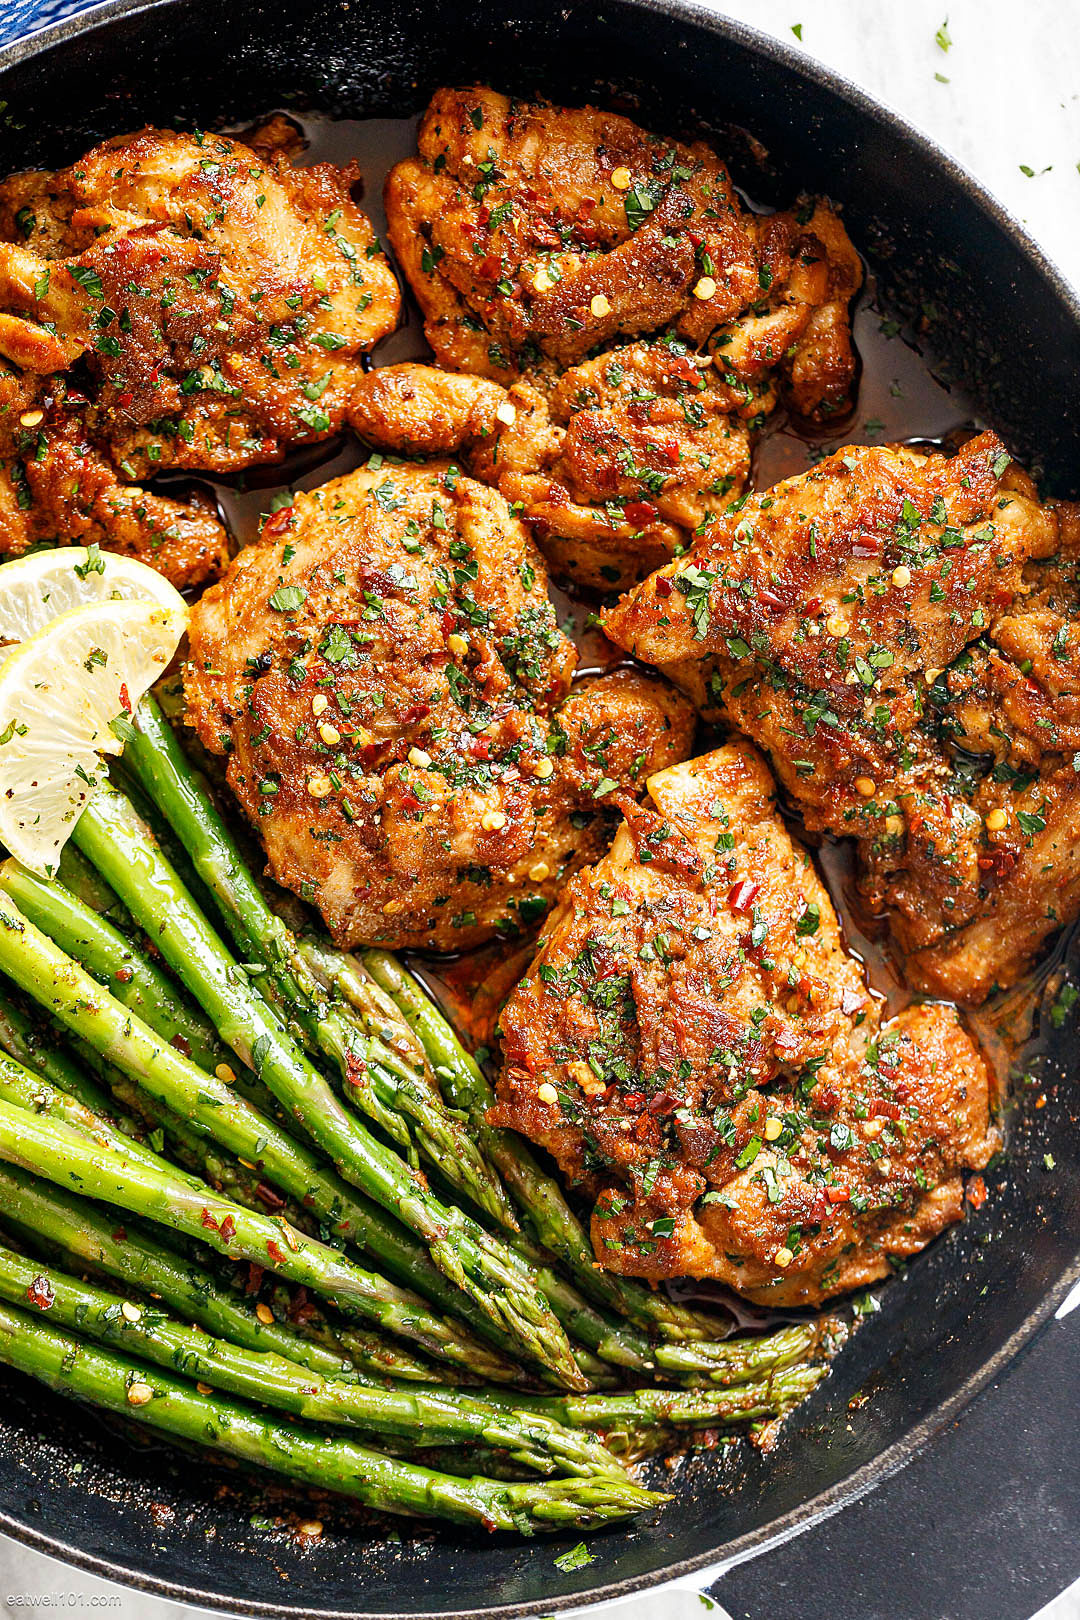 https://www.eatwell101.com/wp-content/uploads/2019/11/Asado-Chicken-Thighs-and-Asparagus-Skillet-recipe-4.jpg